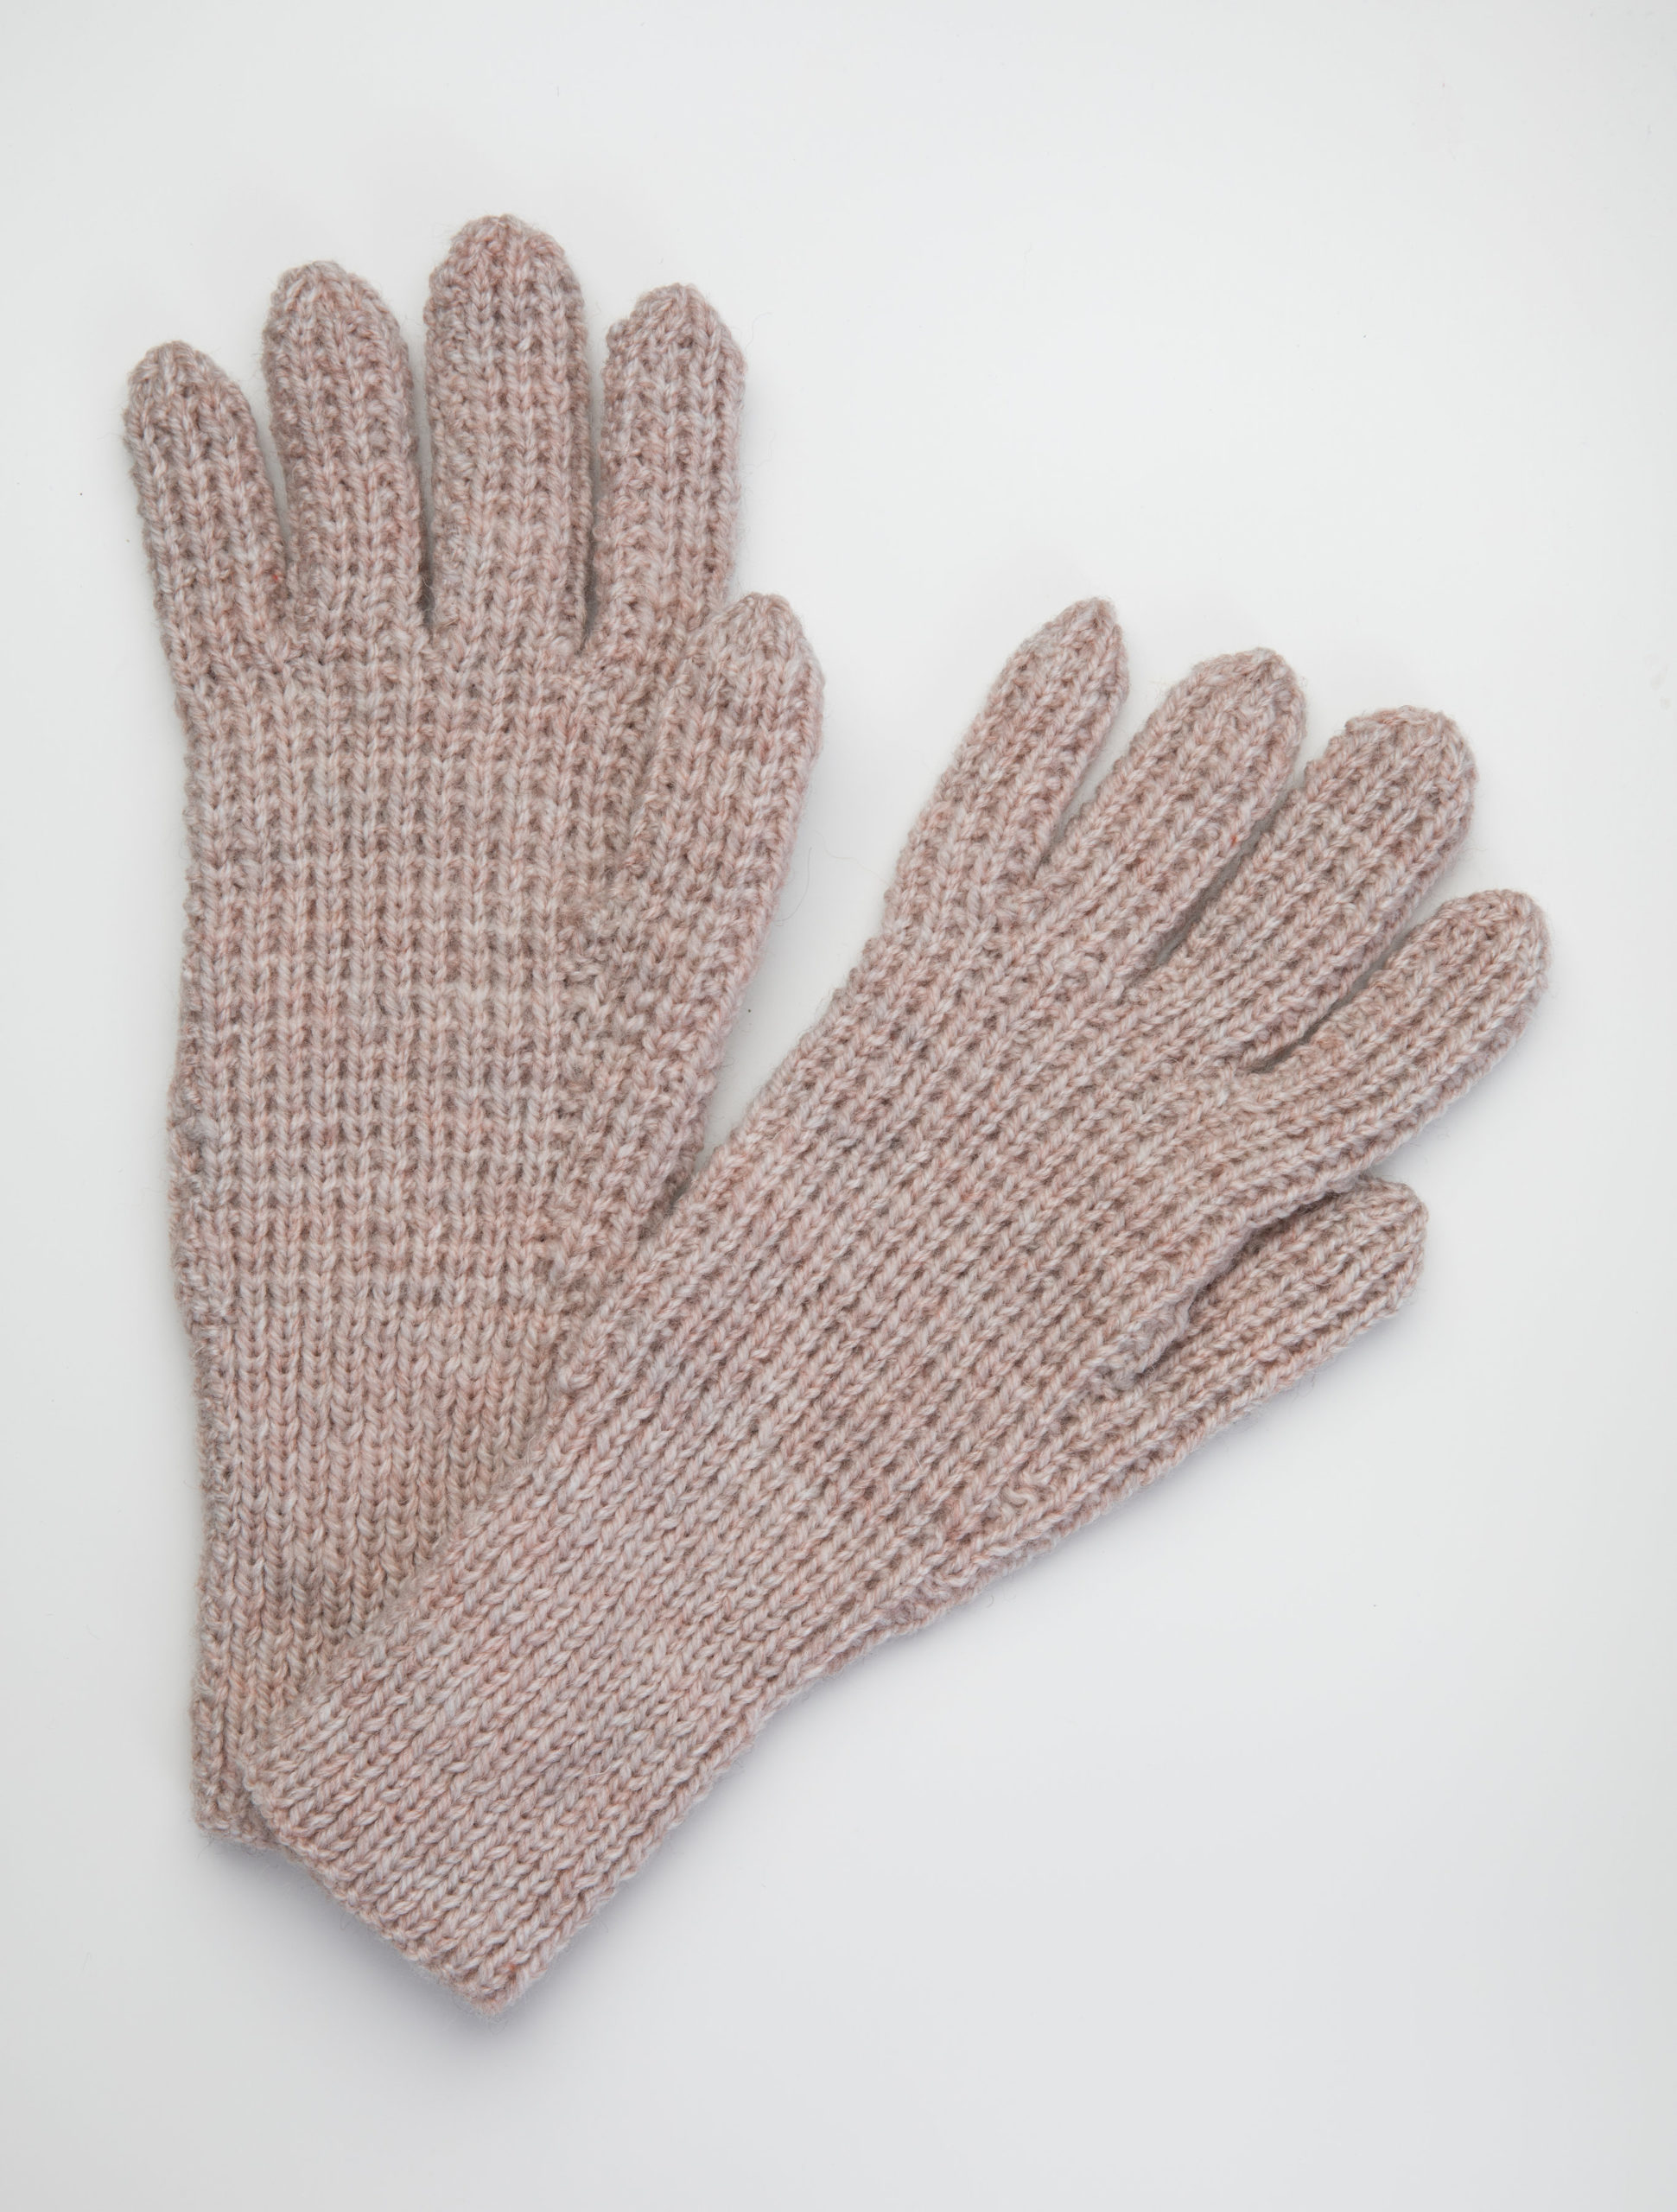 Arran Wool Gloves - The Hunting Stock Market